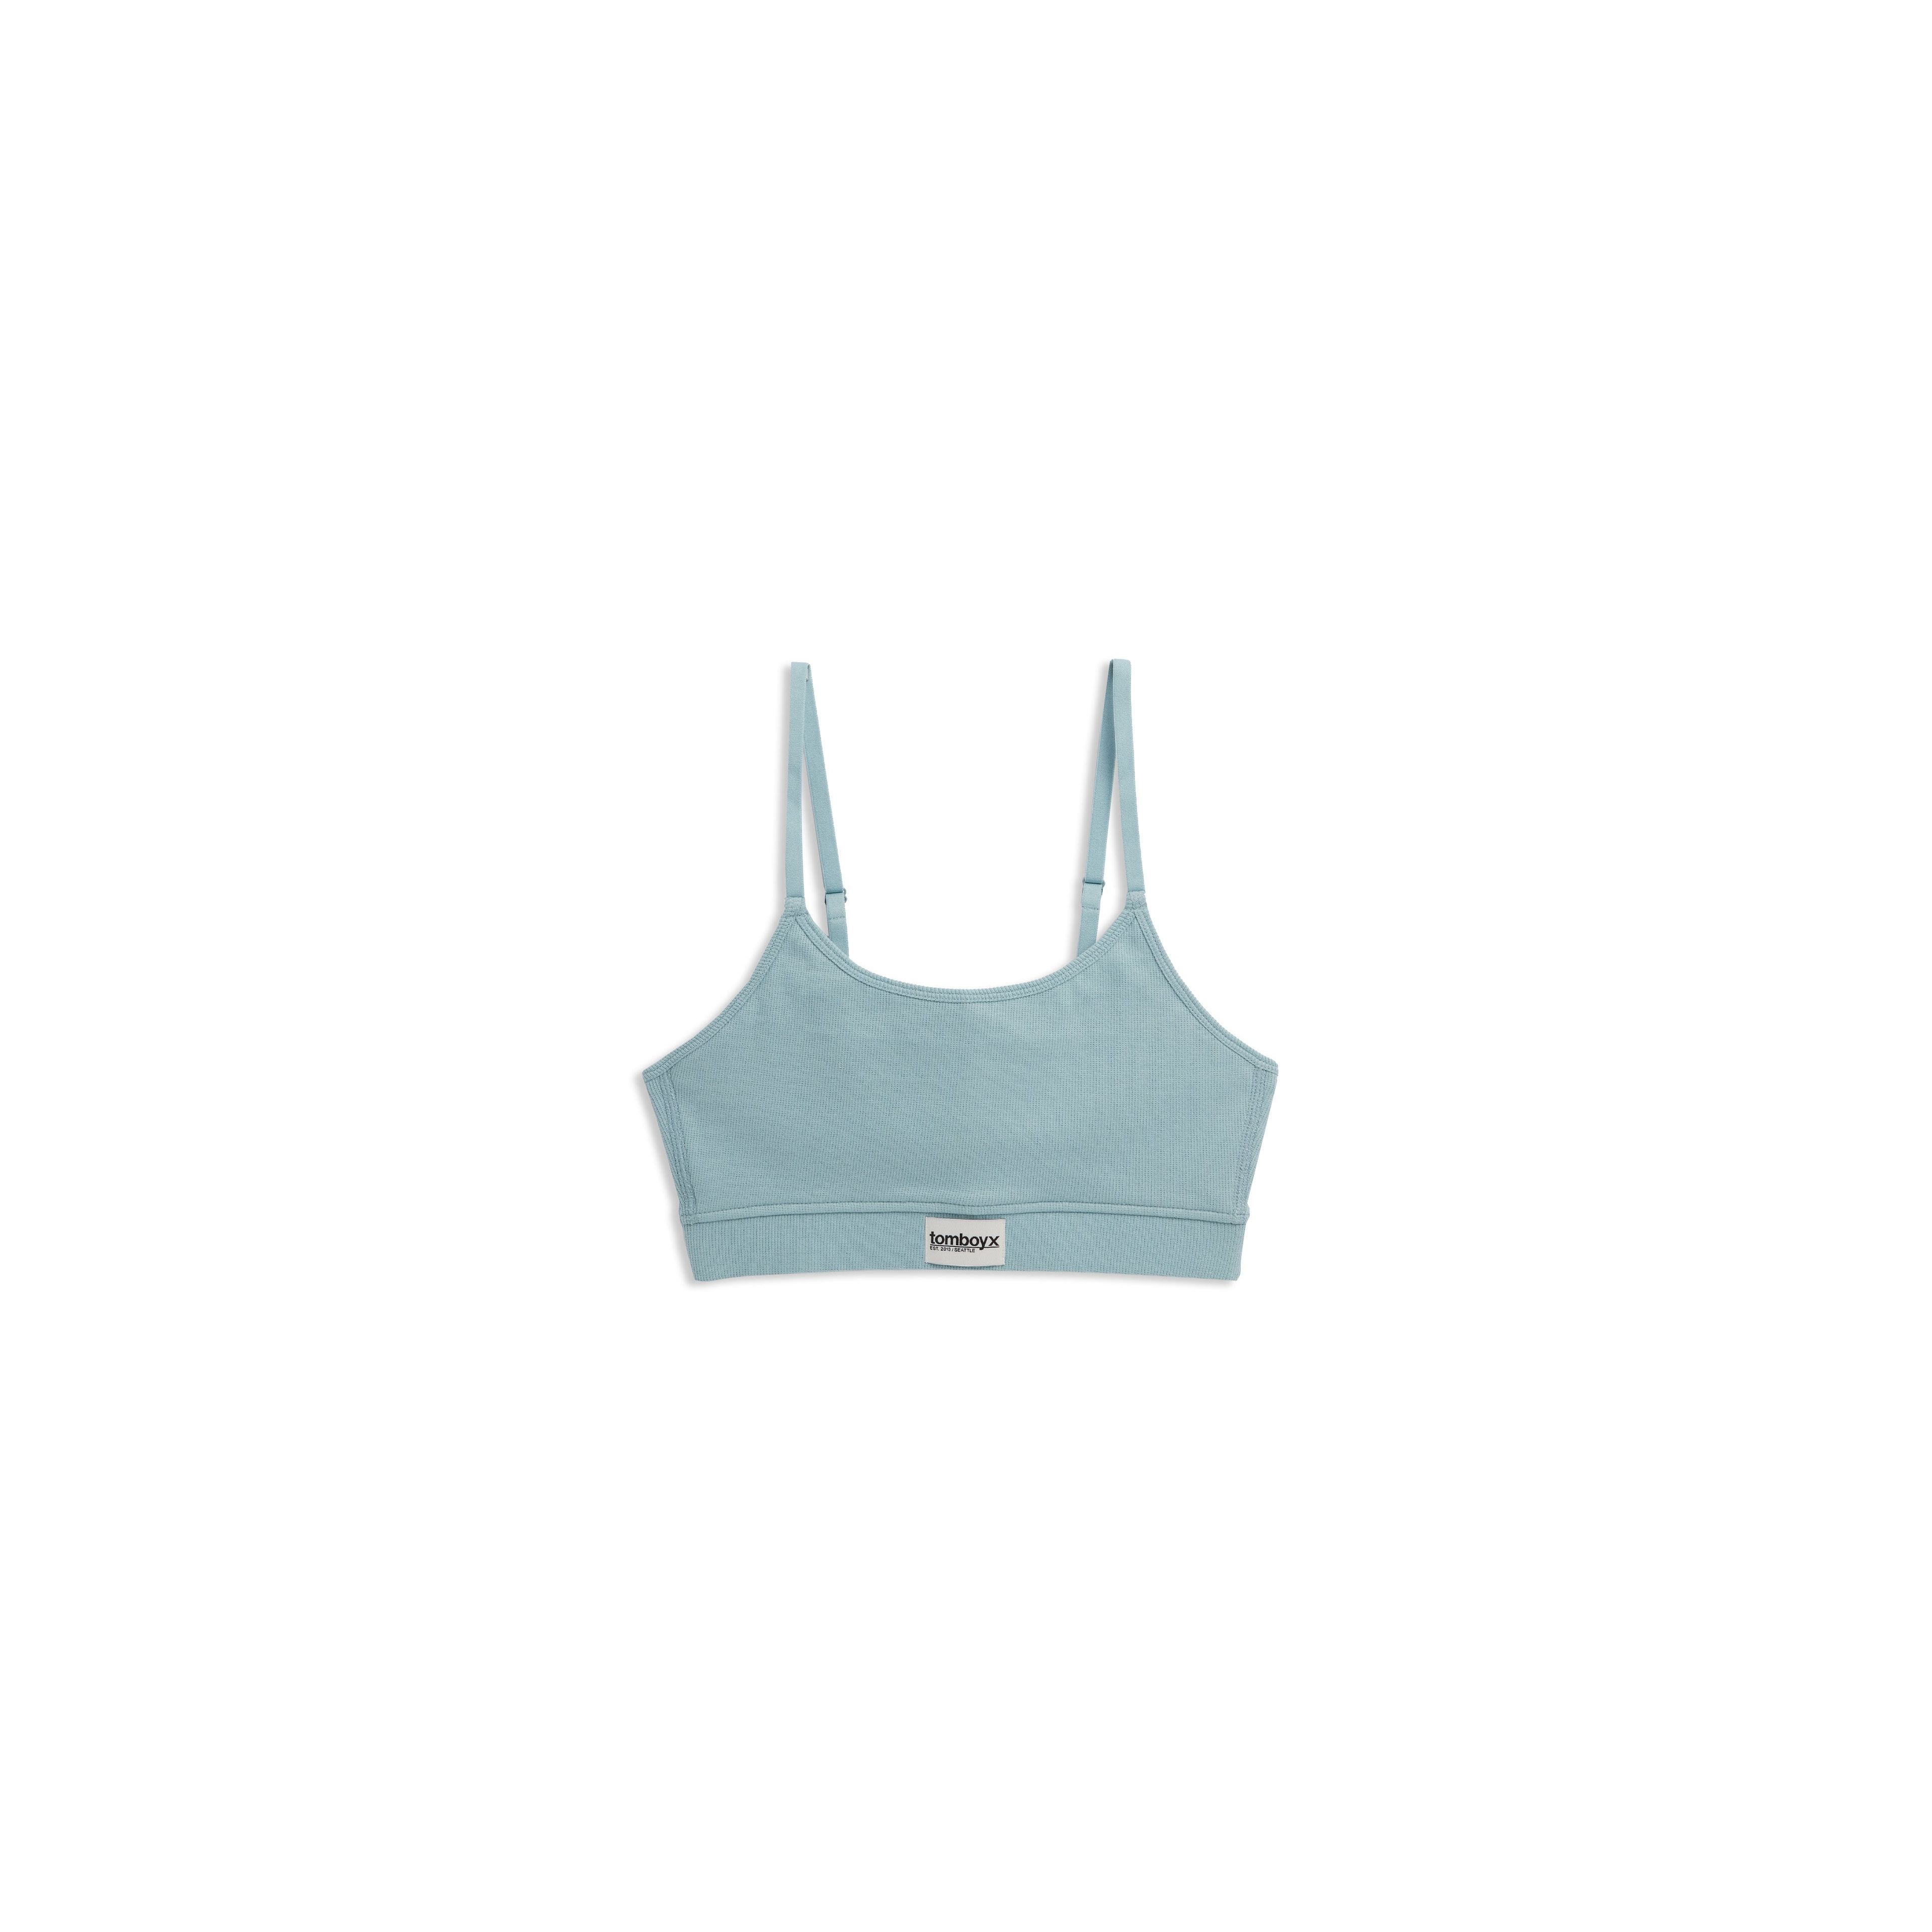 TomboyX Essentials Soft Bra LC - Moonglow on Marmalade